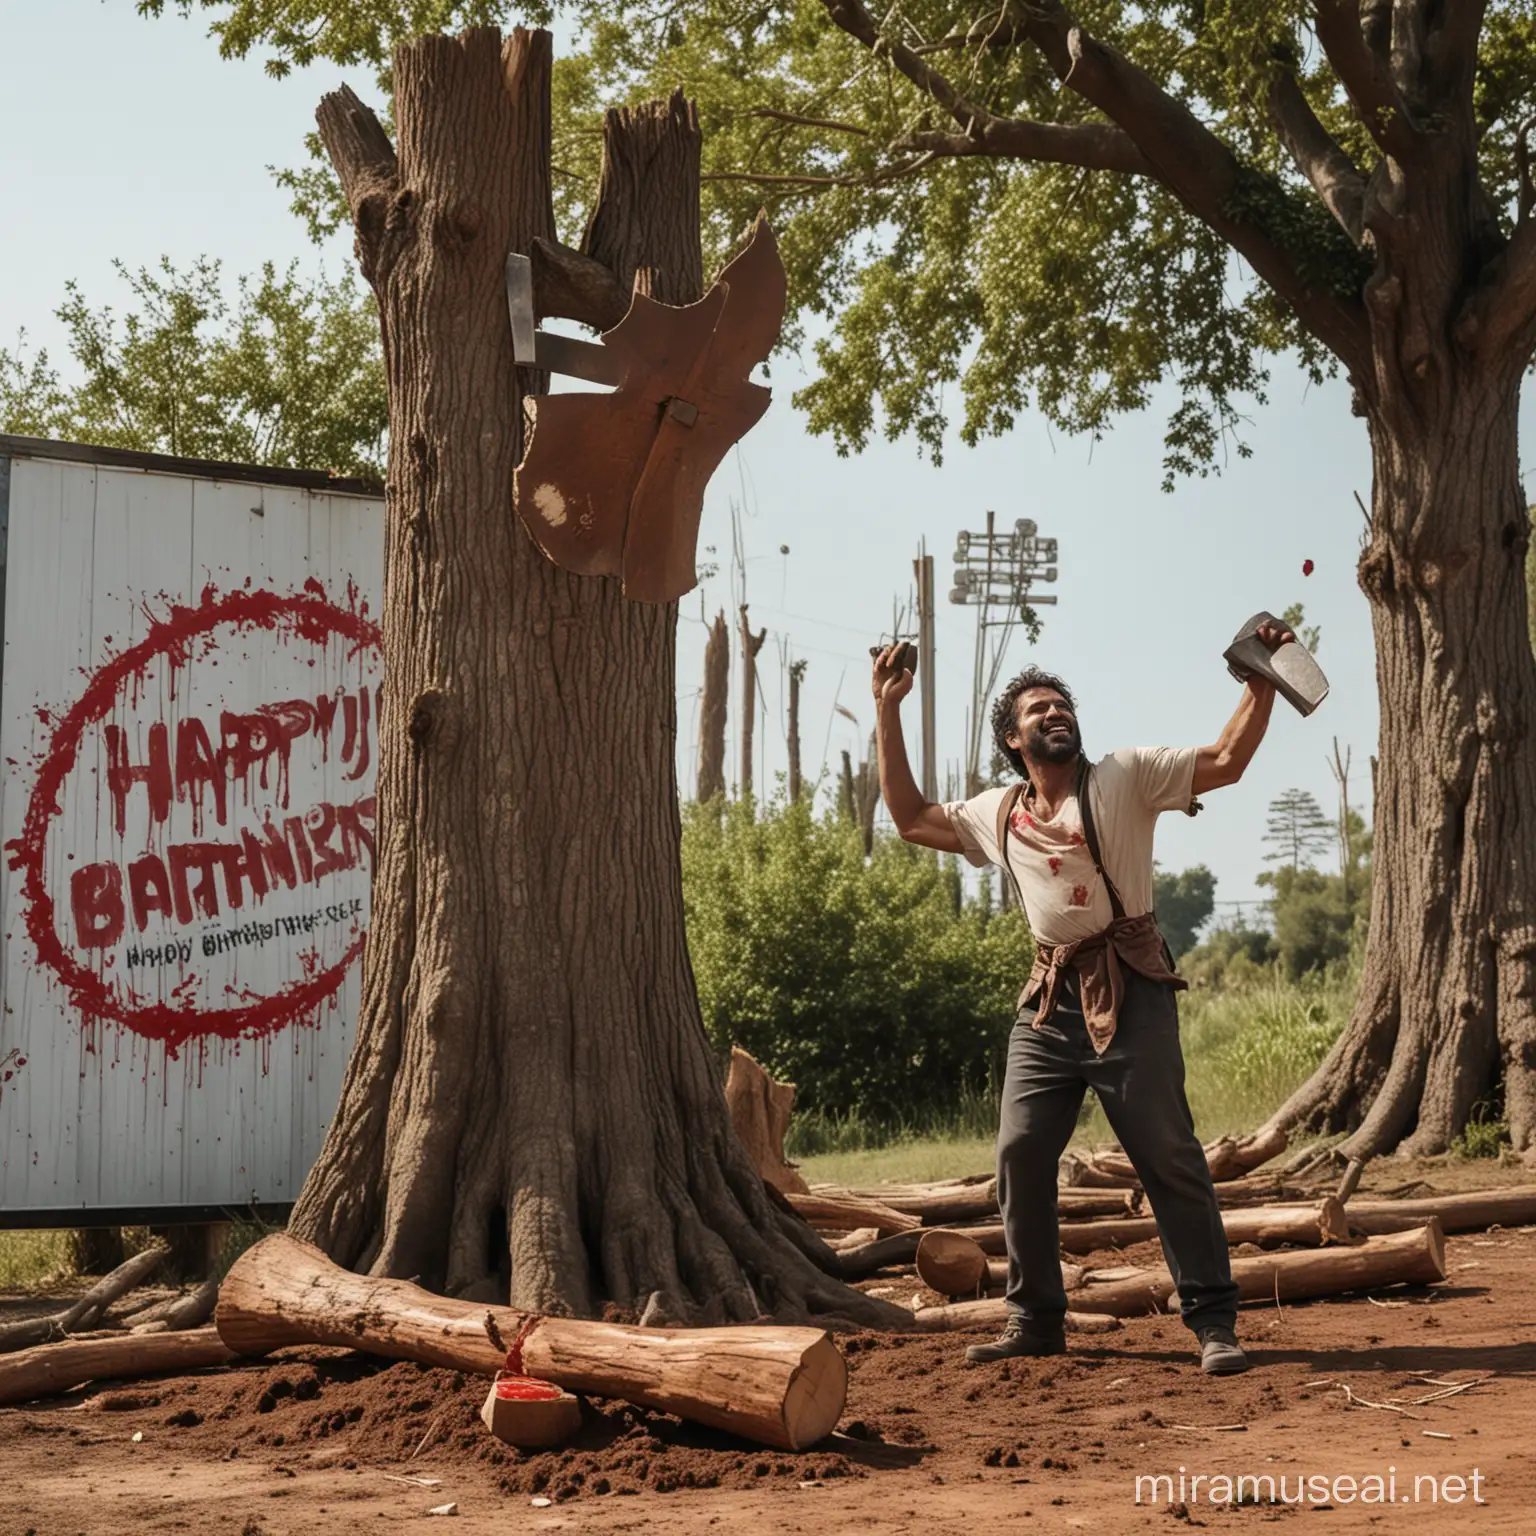 a man standing in the center of the universe cutting the tree with large axe .Tree is made of energy and when the axe is hitting the tree the blood starts coming out. in the background there is a billboard that says HAPPY BIRTHDAY MAGISTRE